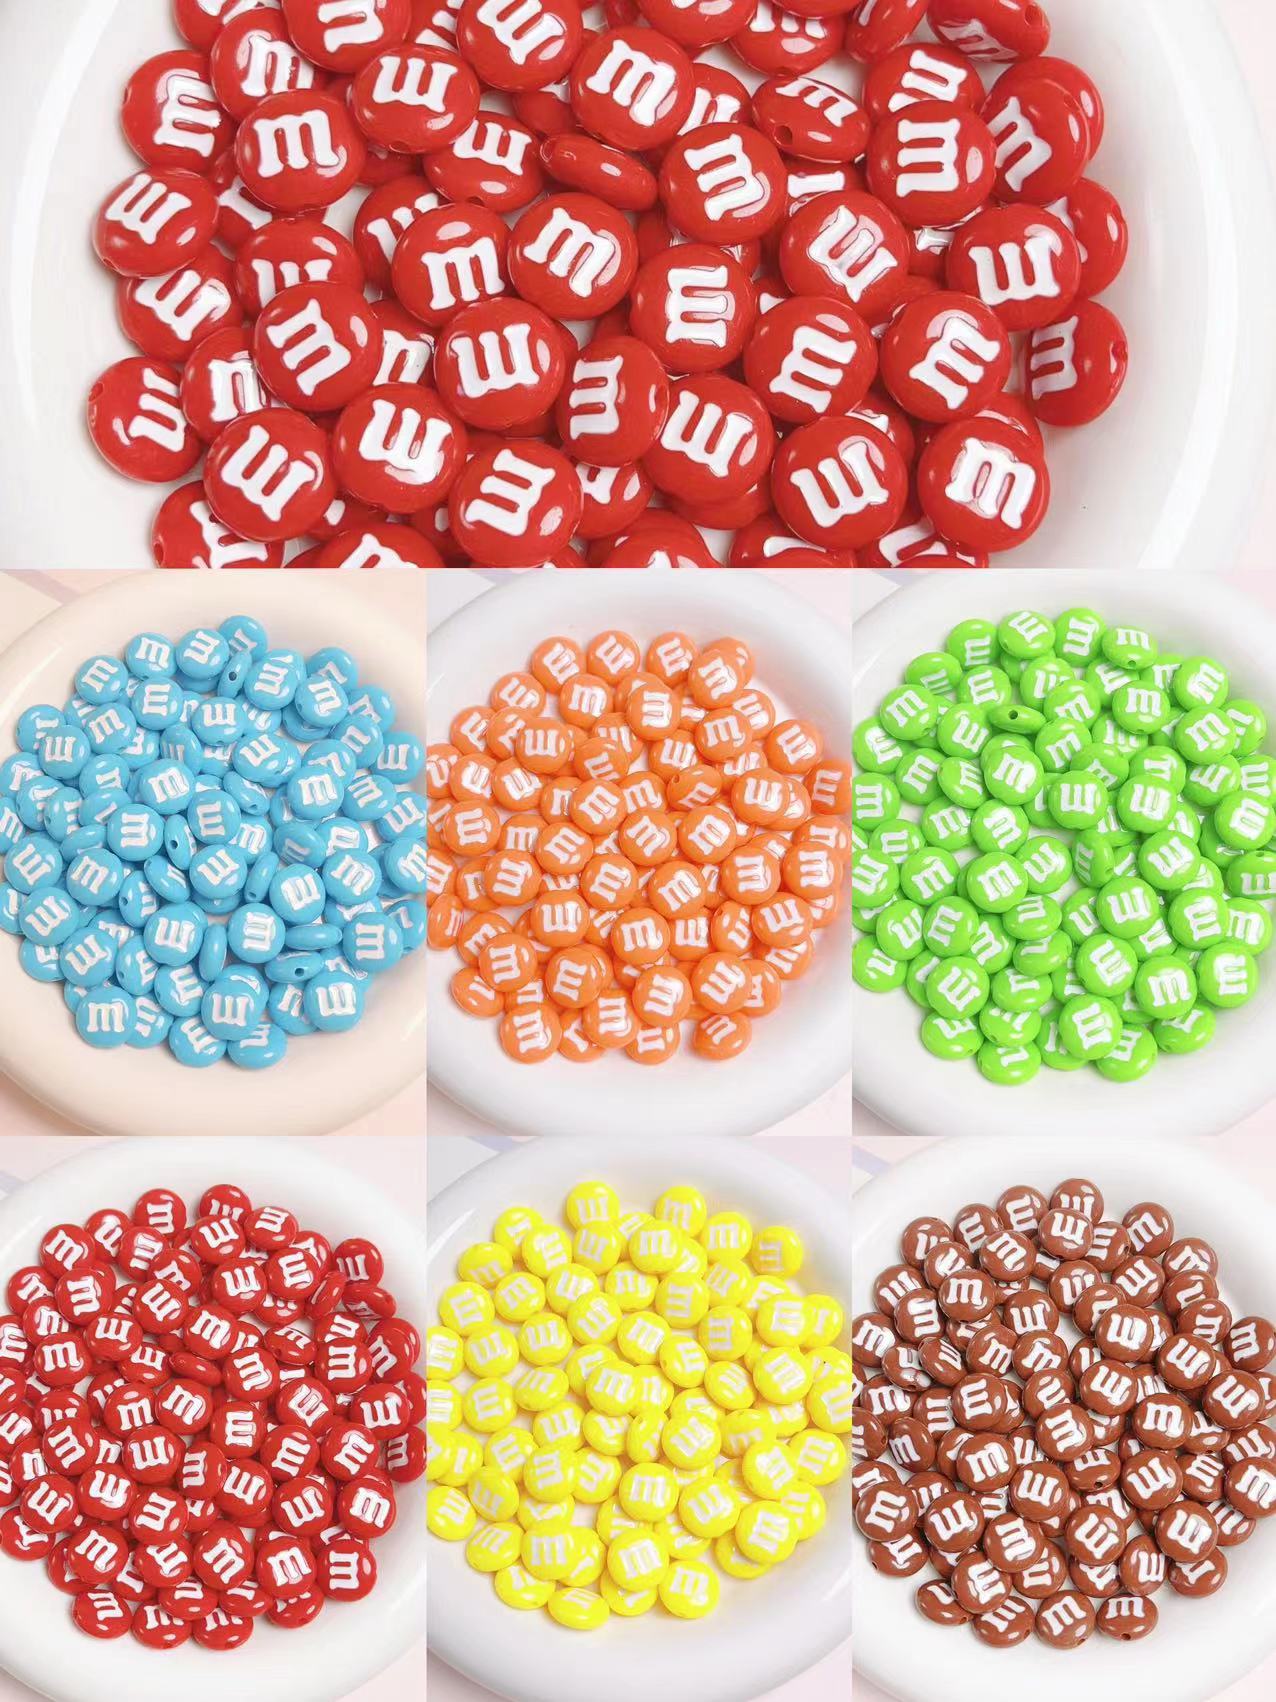 A0560 MM BEADS MIX(PRE-SALE)